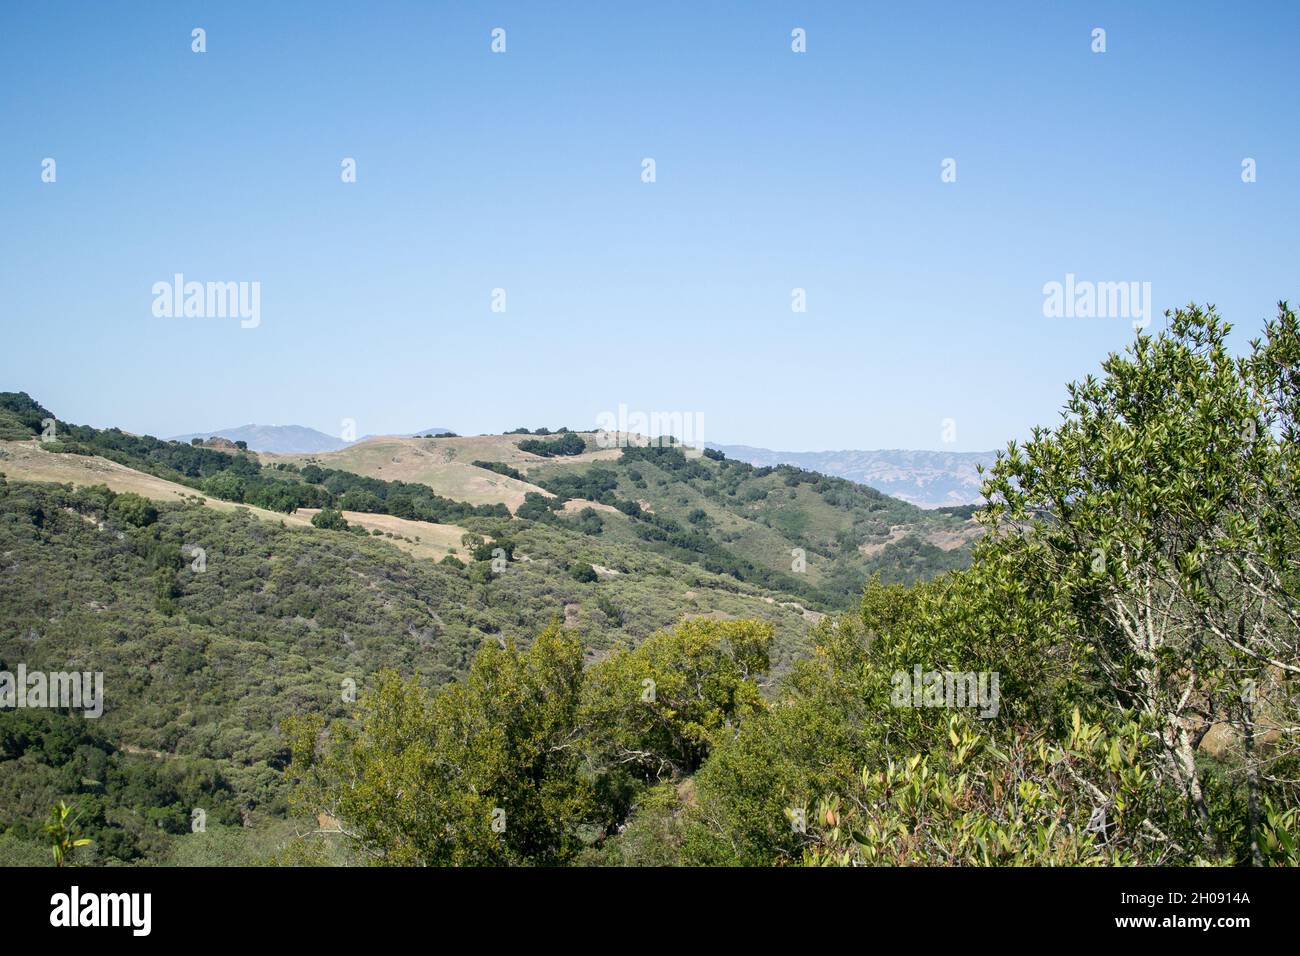 View of the tree covered mountains at Rancho Canada del Oro Open Space Preserve, California. Stock Photo